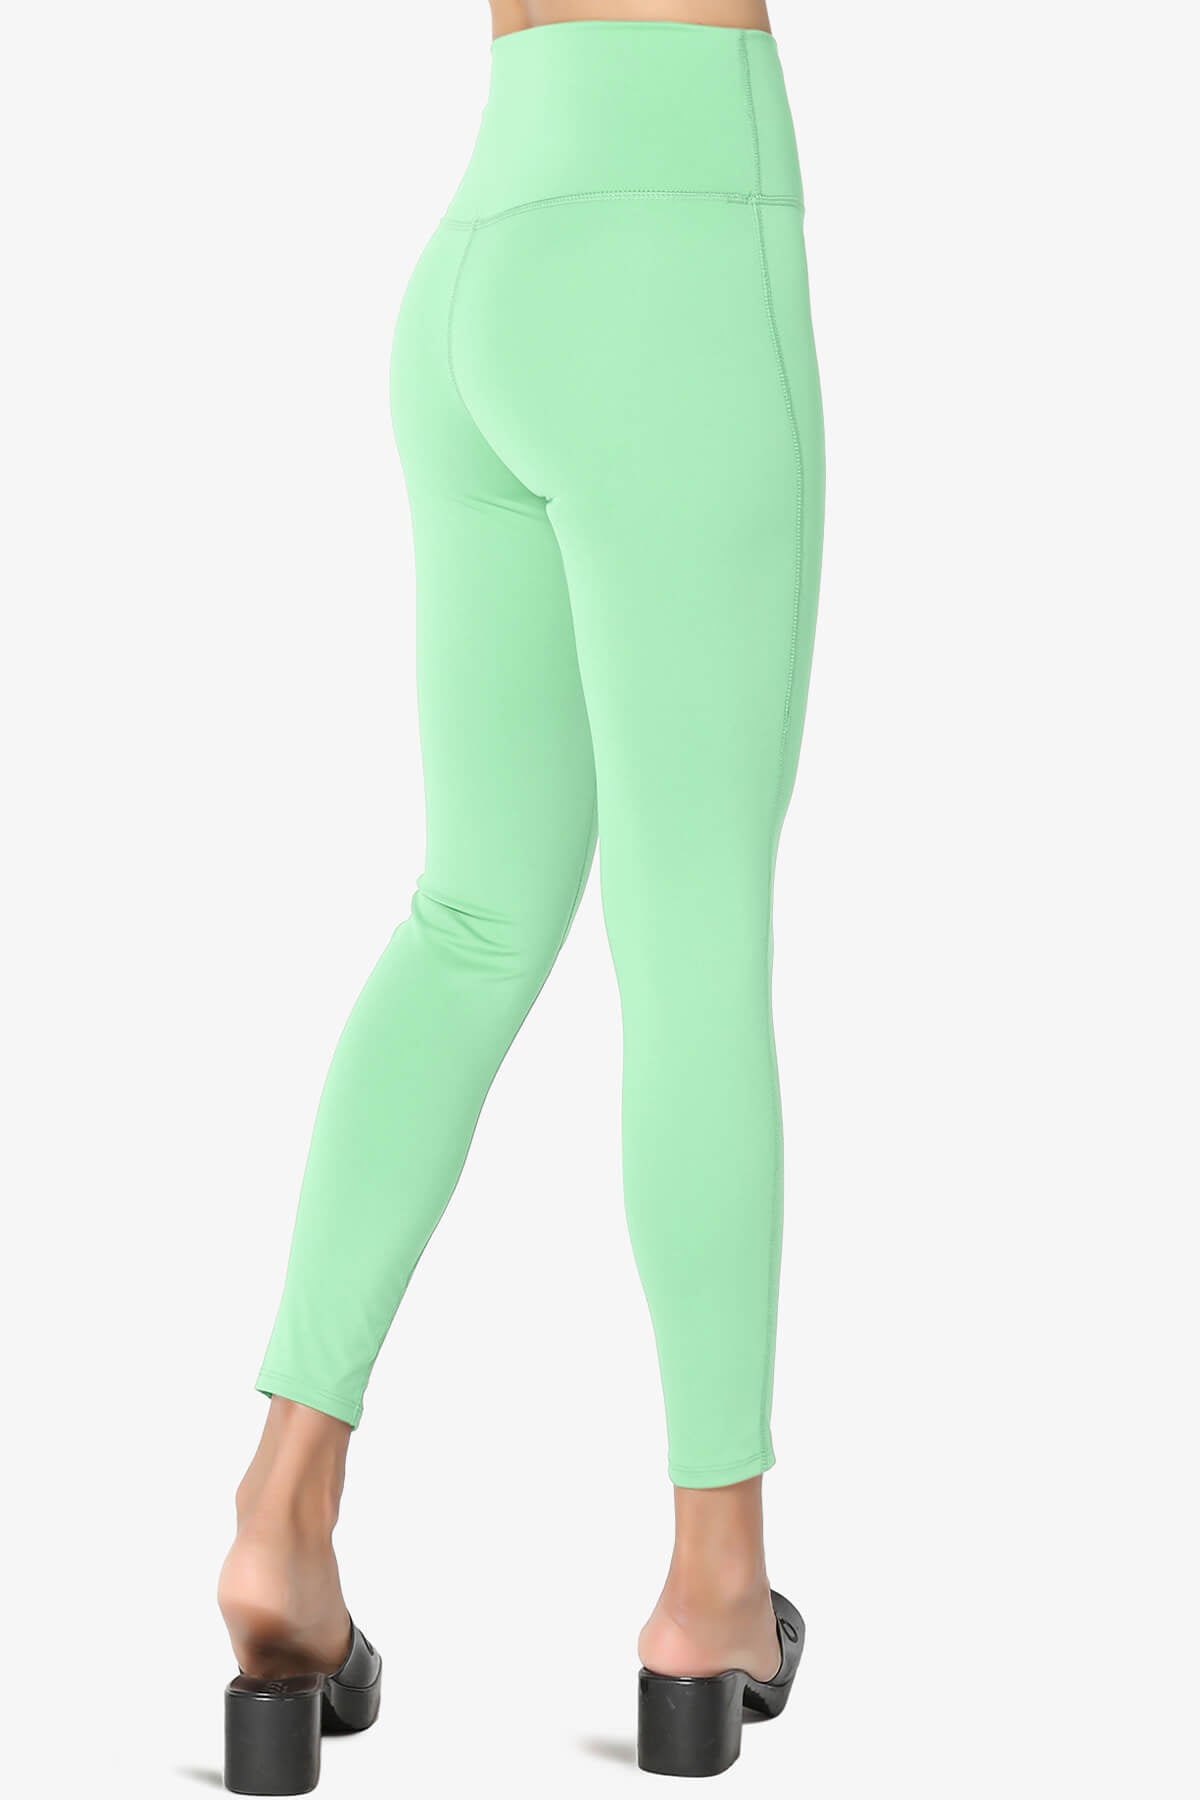 Mosco Athletic Tummy Control Workout Leggings GREEN MINT_1